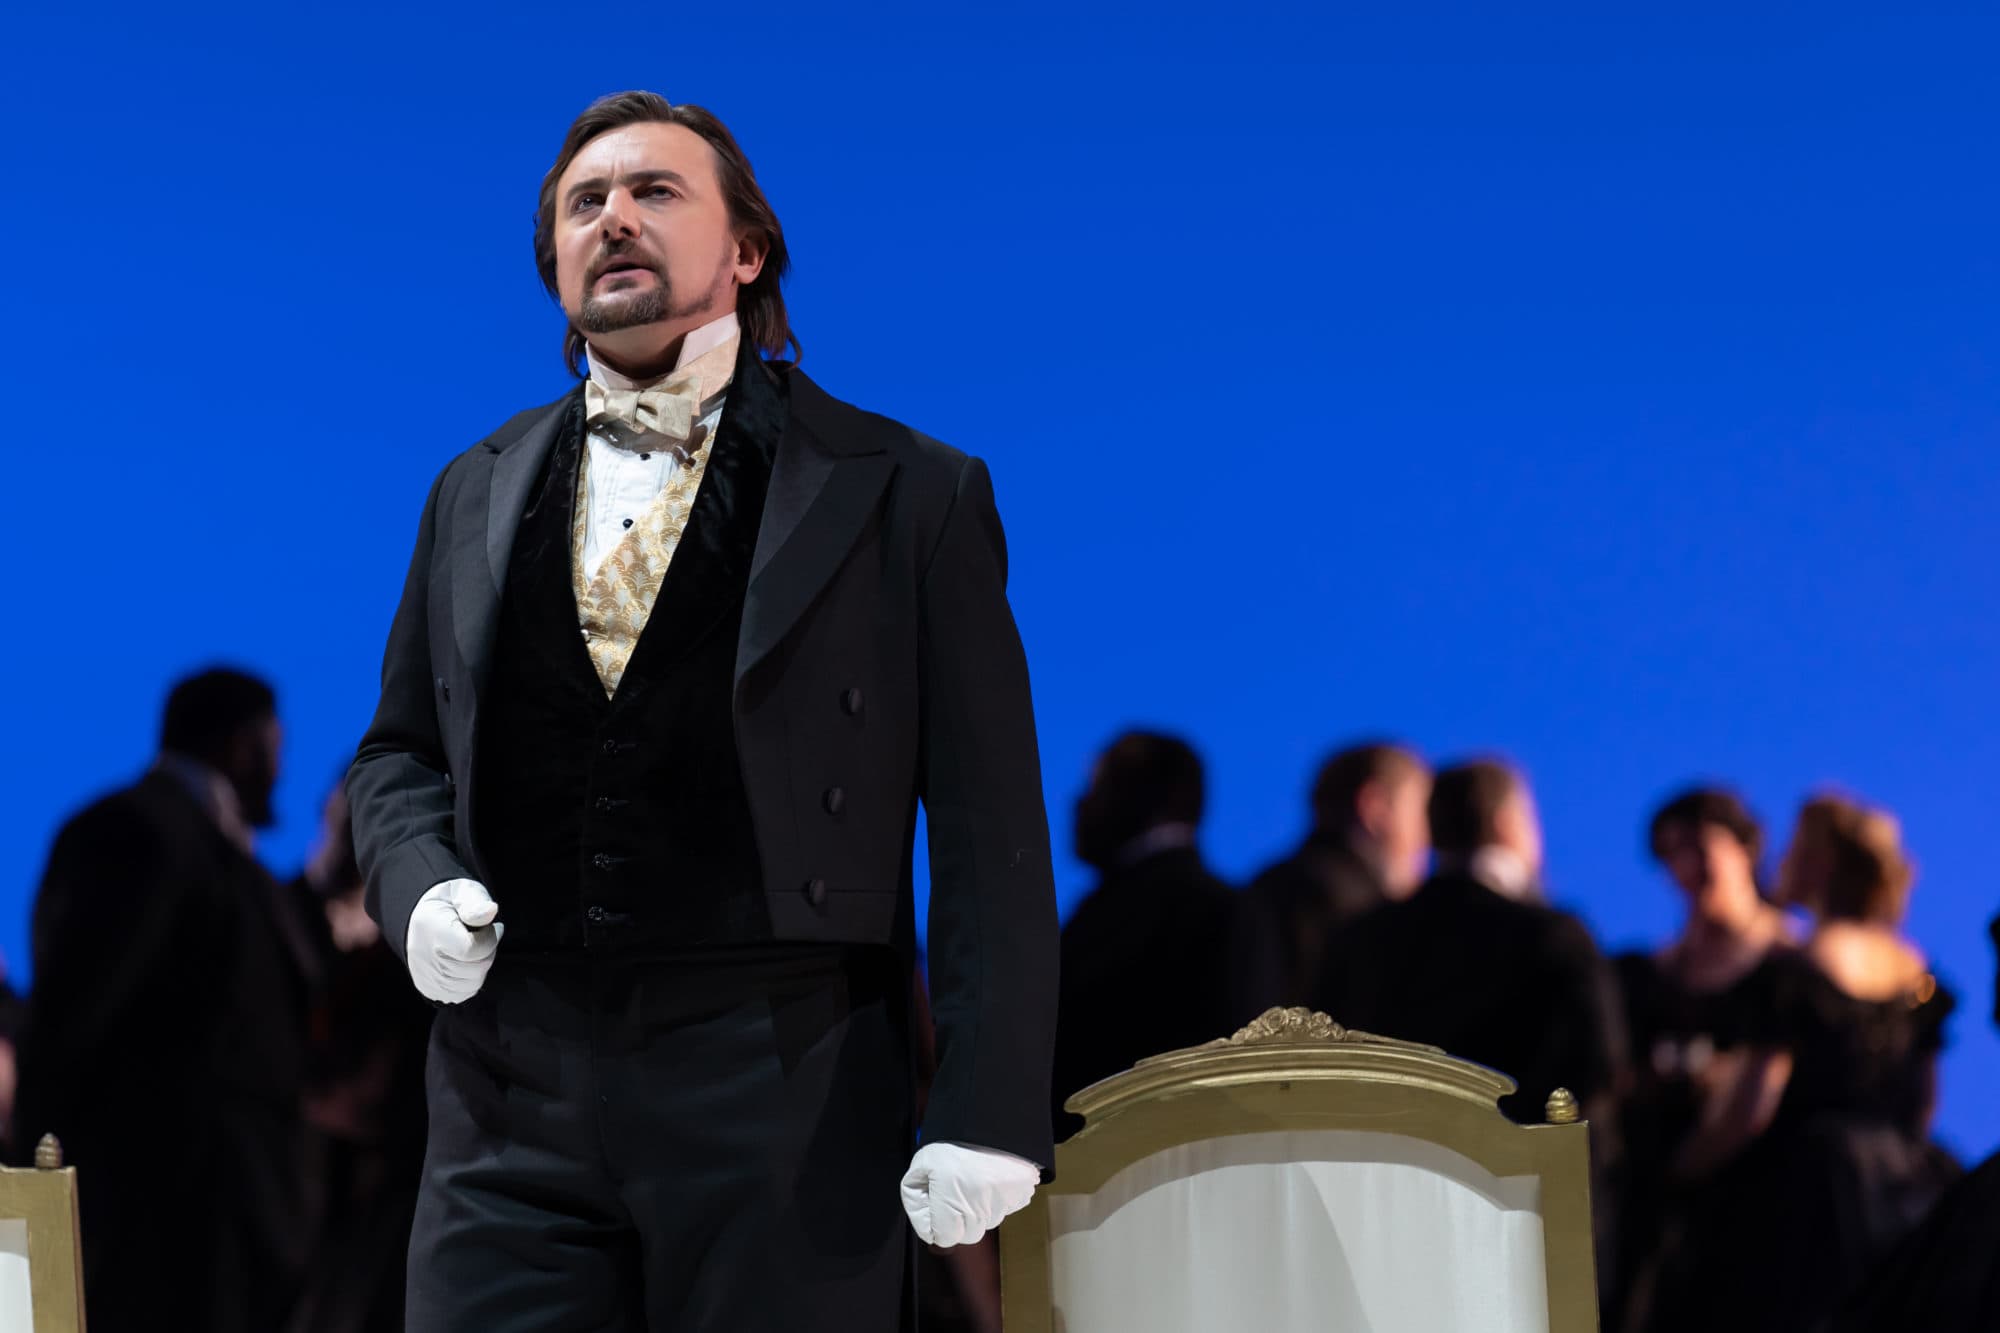 Igor Golovatenko makes his US debut as Eugene Onegin in WNO's production. Photo by Scott Suchman.